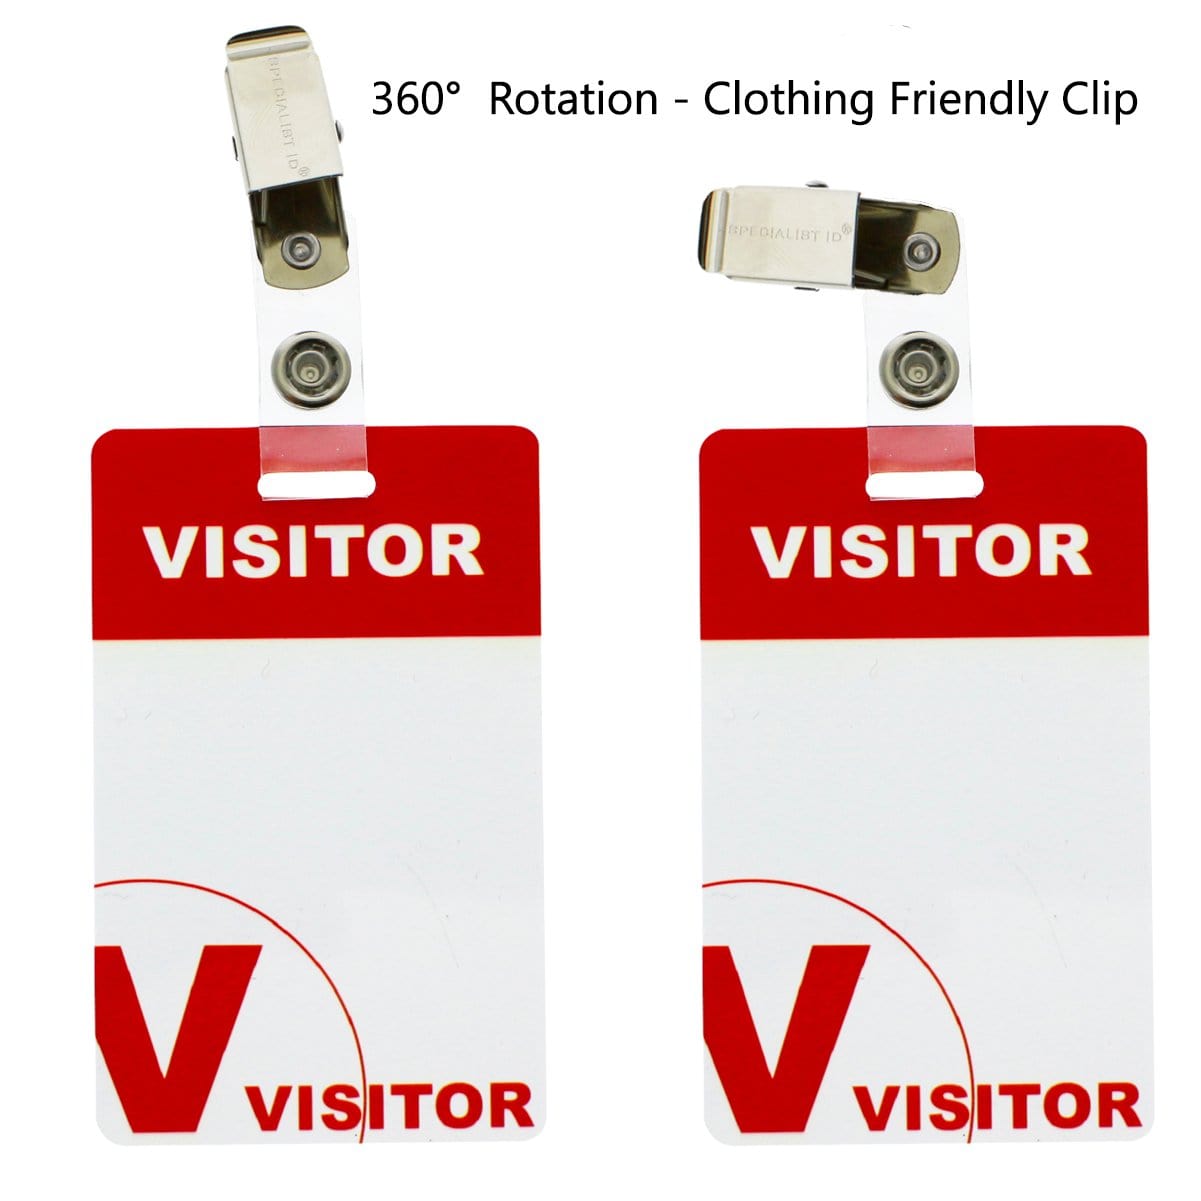 Reusable Visitor Passes with Clothing Friendly Badge Clip